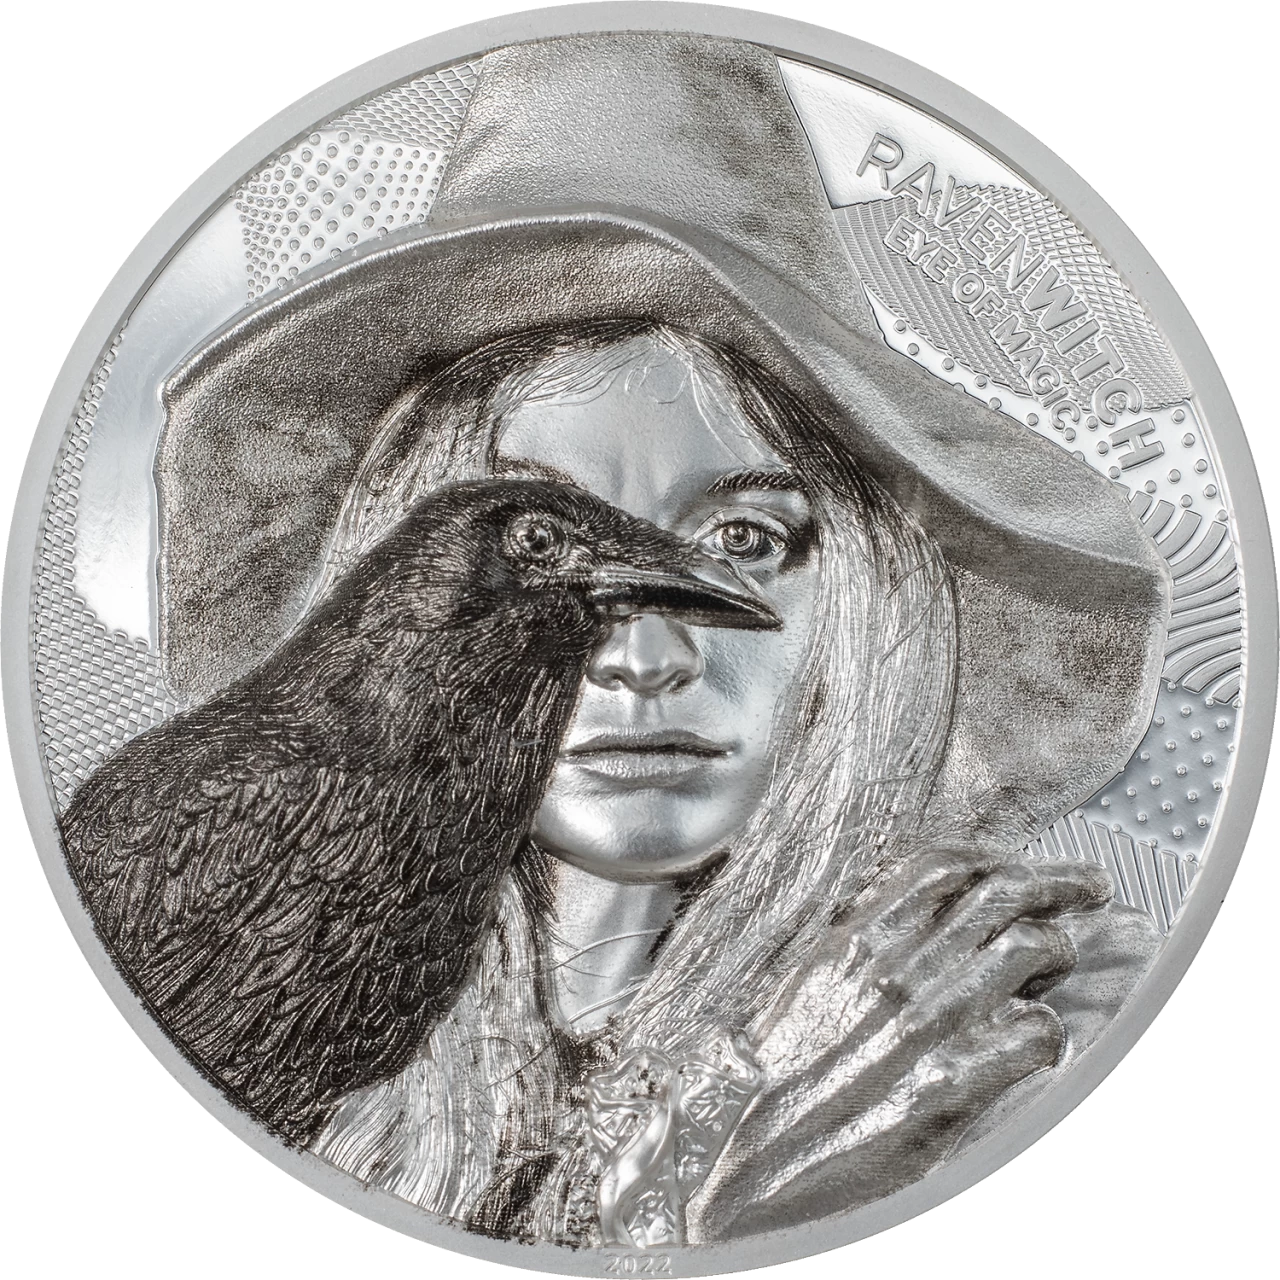 2022 Cook Island RAVEN WITCH - EYE OF MAGIC 2 oz Silver Coin - OZB